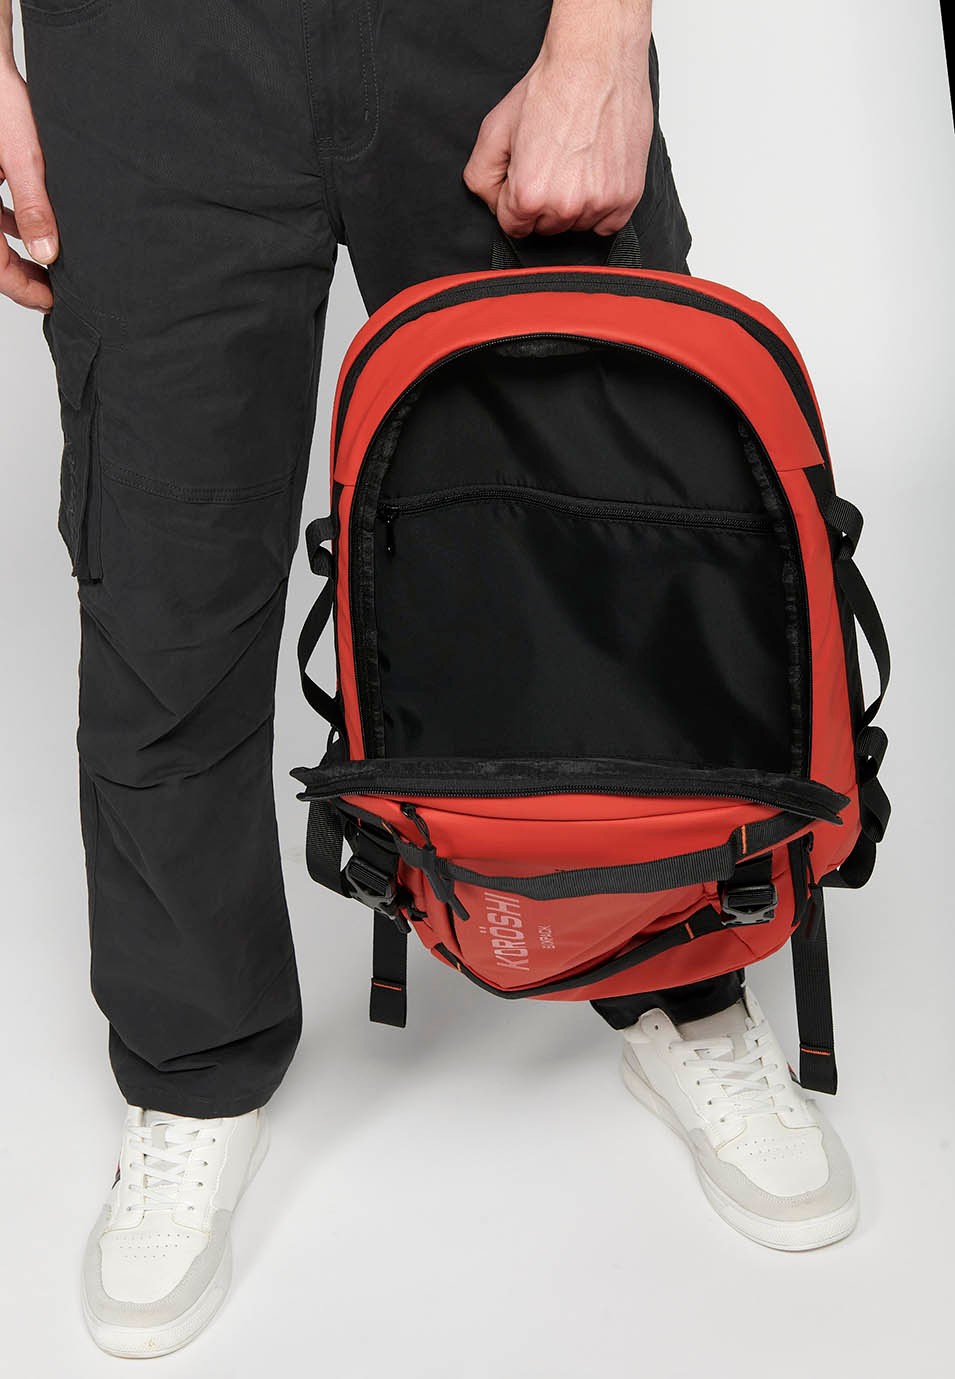 Koröshi backpack with two zippered compartments, one for a laptop and adjustable straps in Red 6